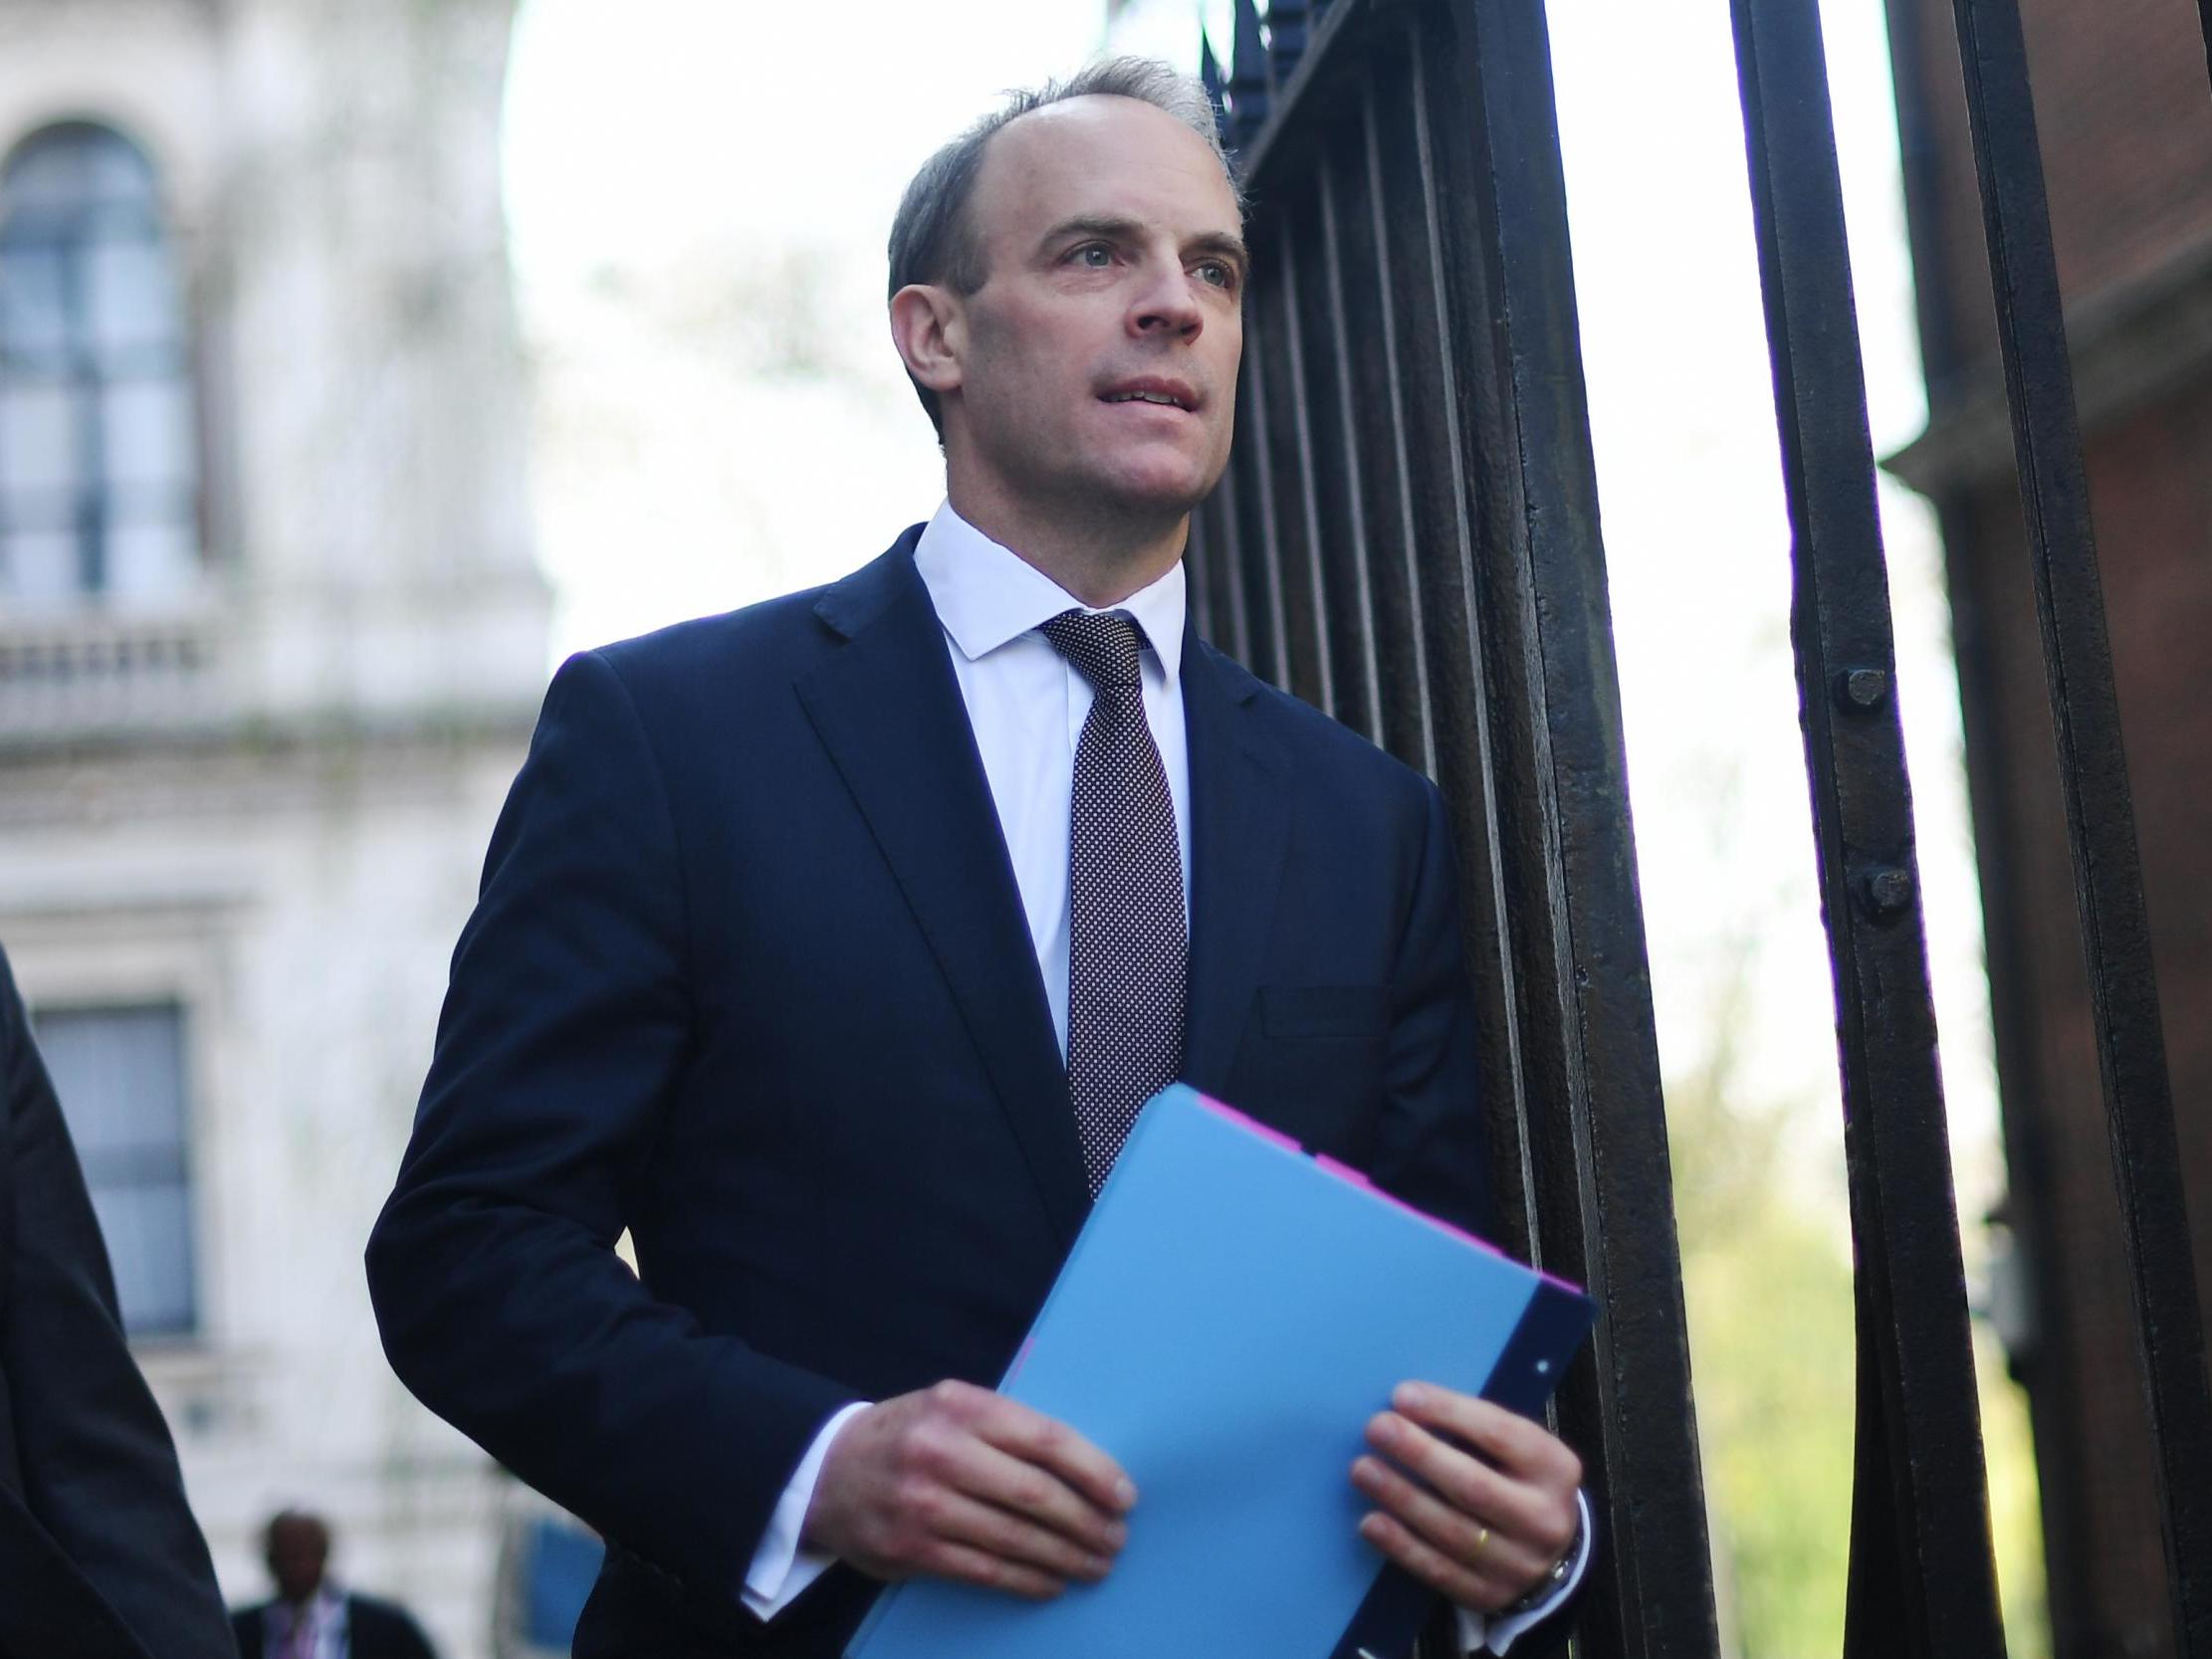 Dominic Raab, as acting PM, is responsible for the Downing Street line